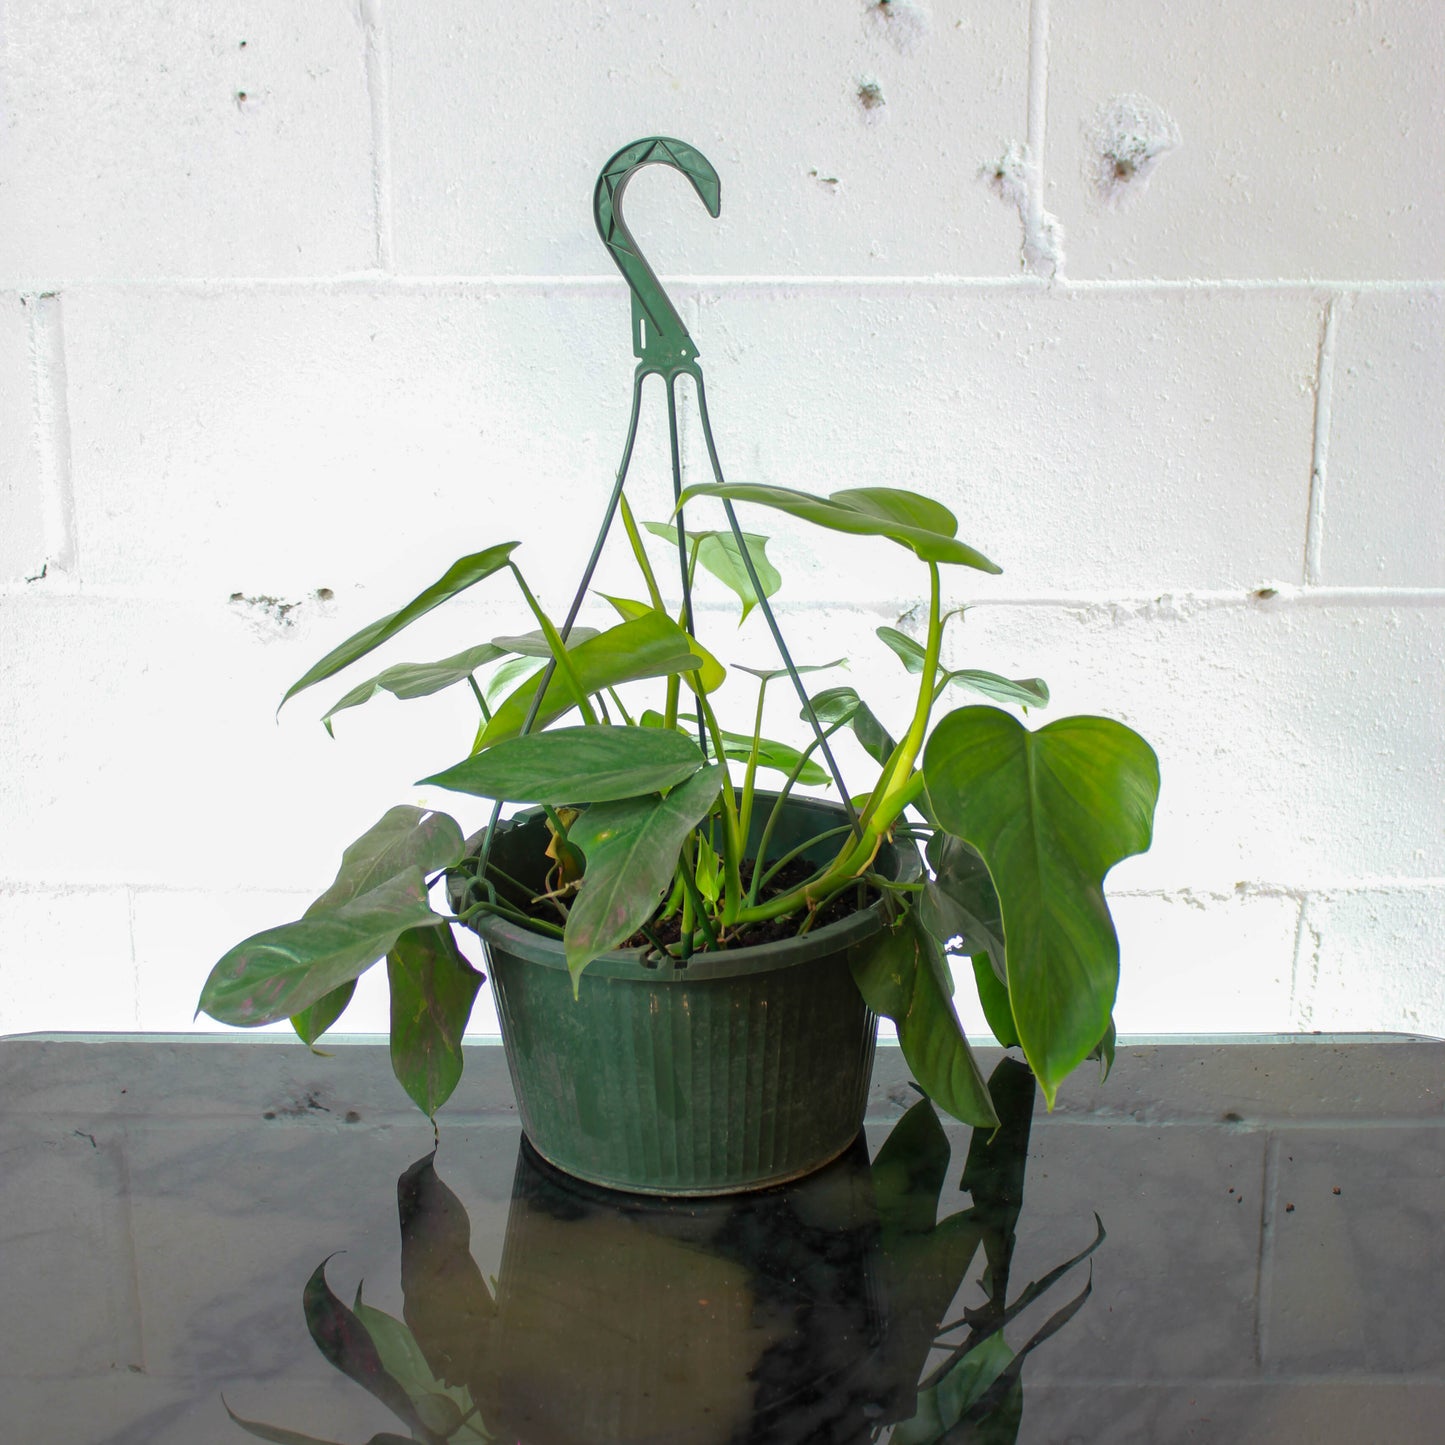 Green Philo Pedatum (Philodendron) in a 10 inch pot. Indoor plant for sale by Promise Supply for delivery and pickup in Toronto